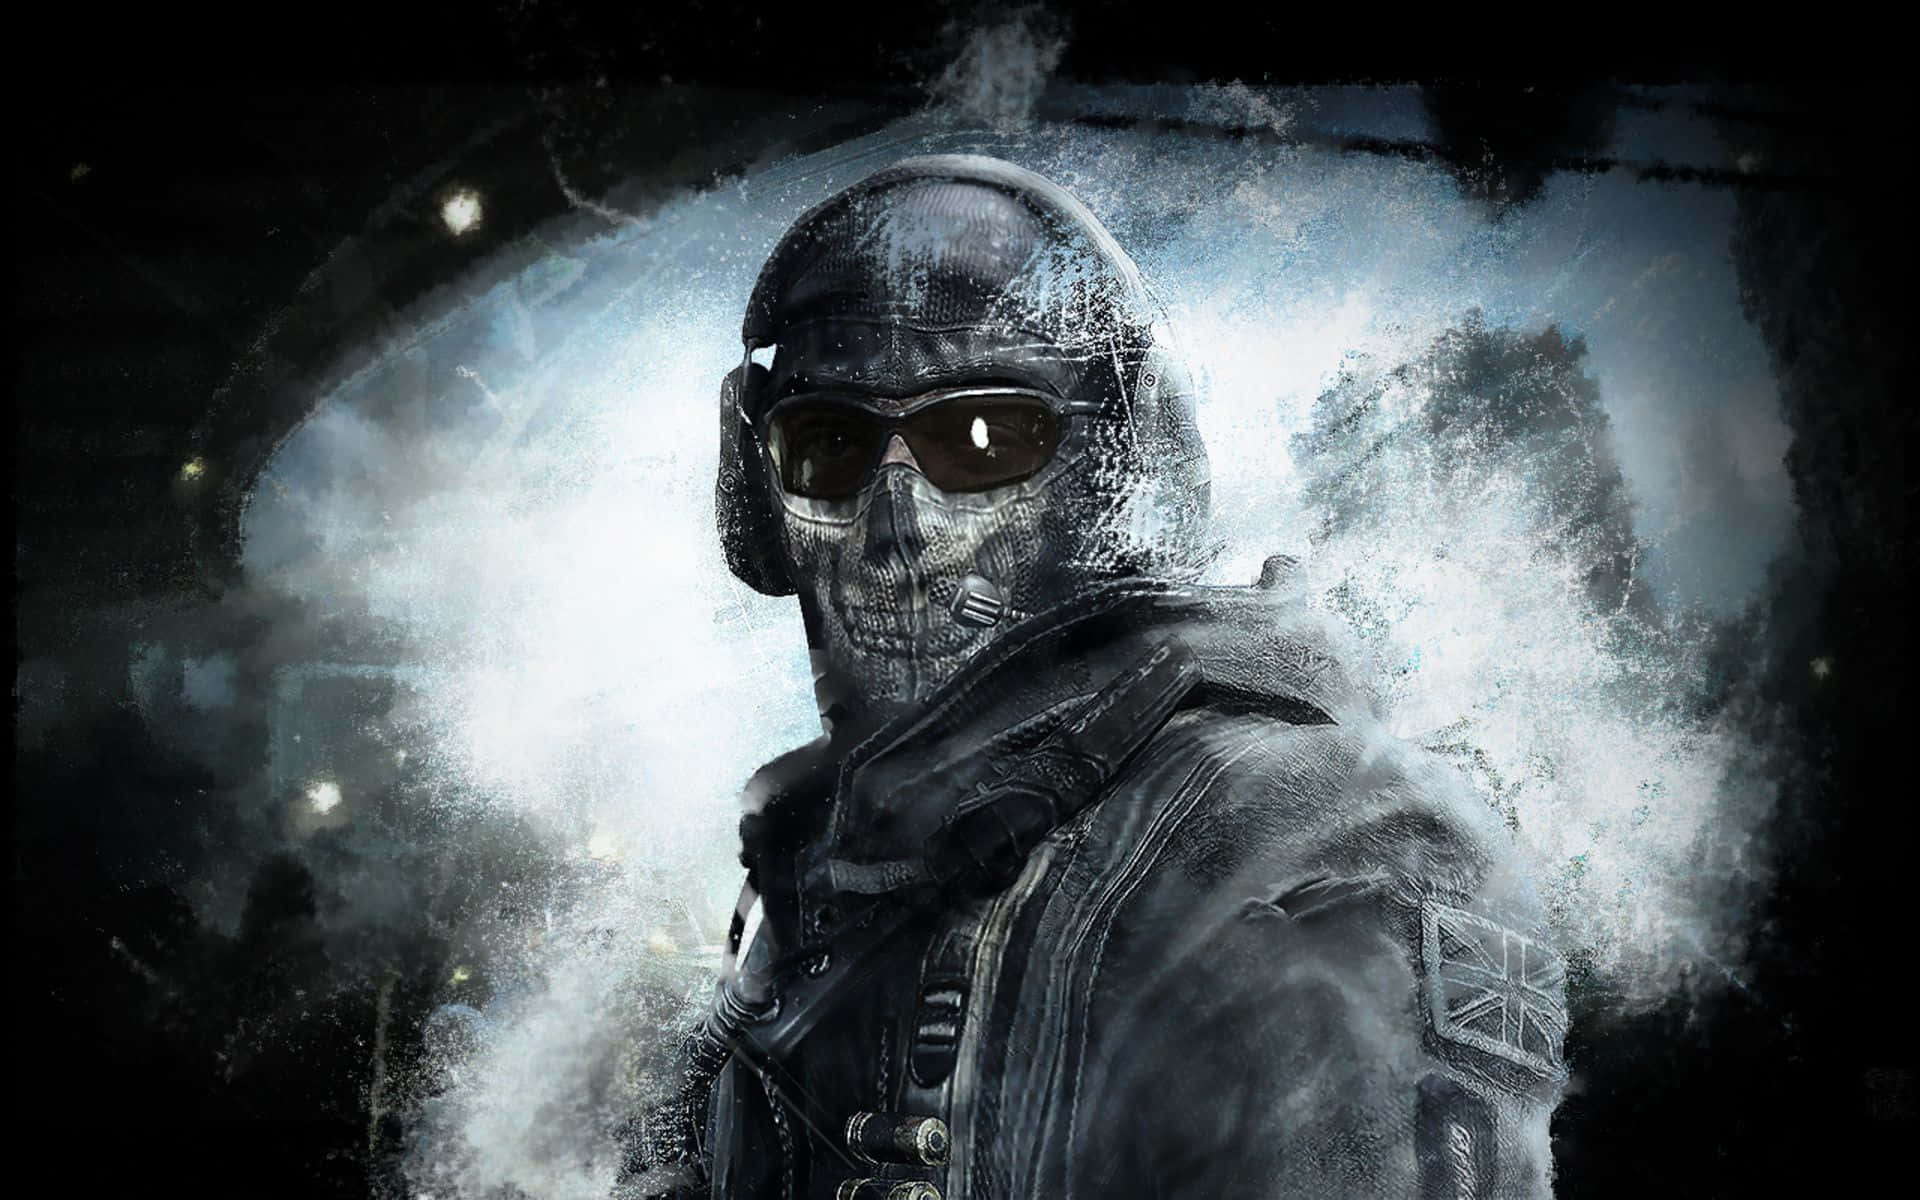 Intense Call of Duty Soldiers in Battlefield Action Wallpaper